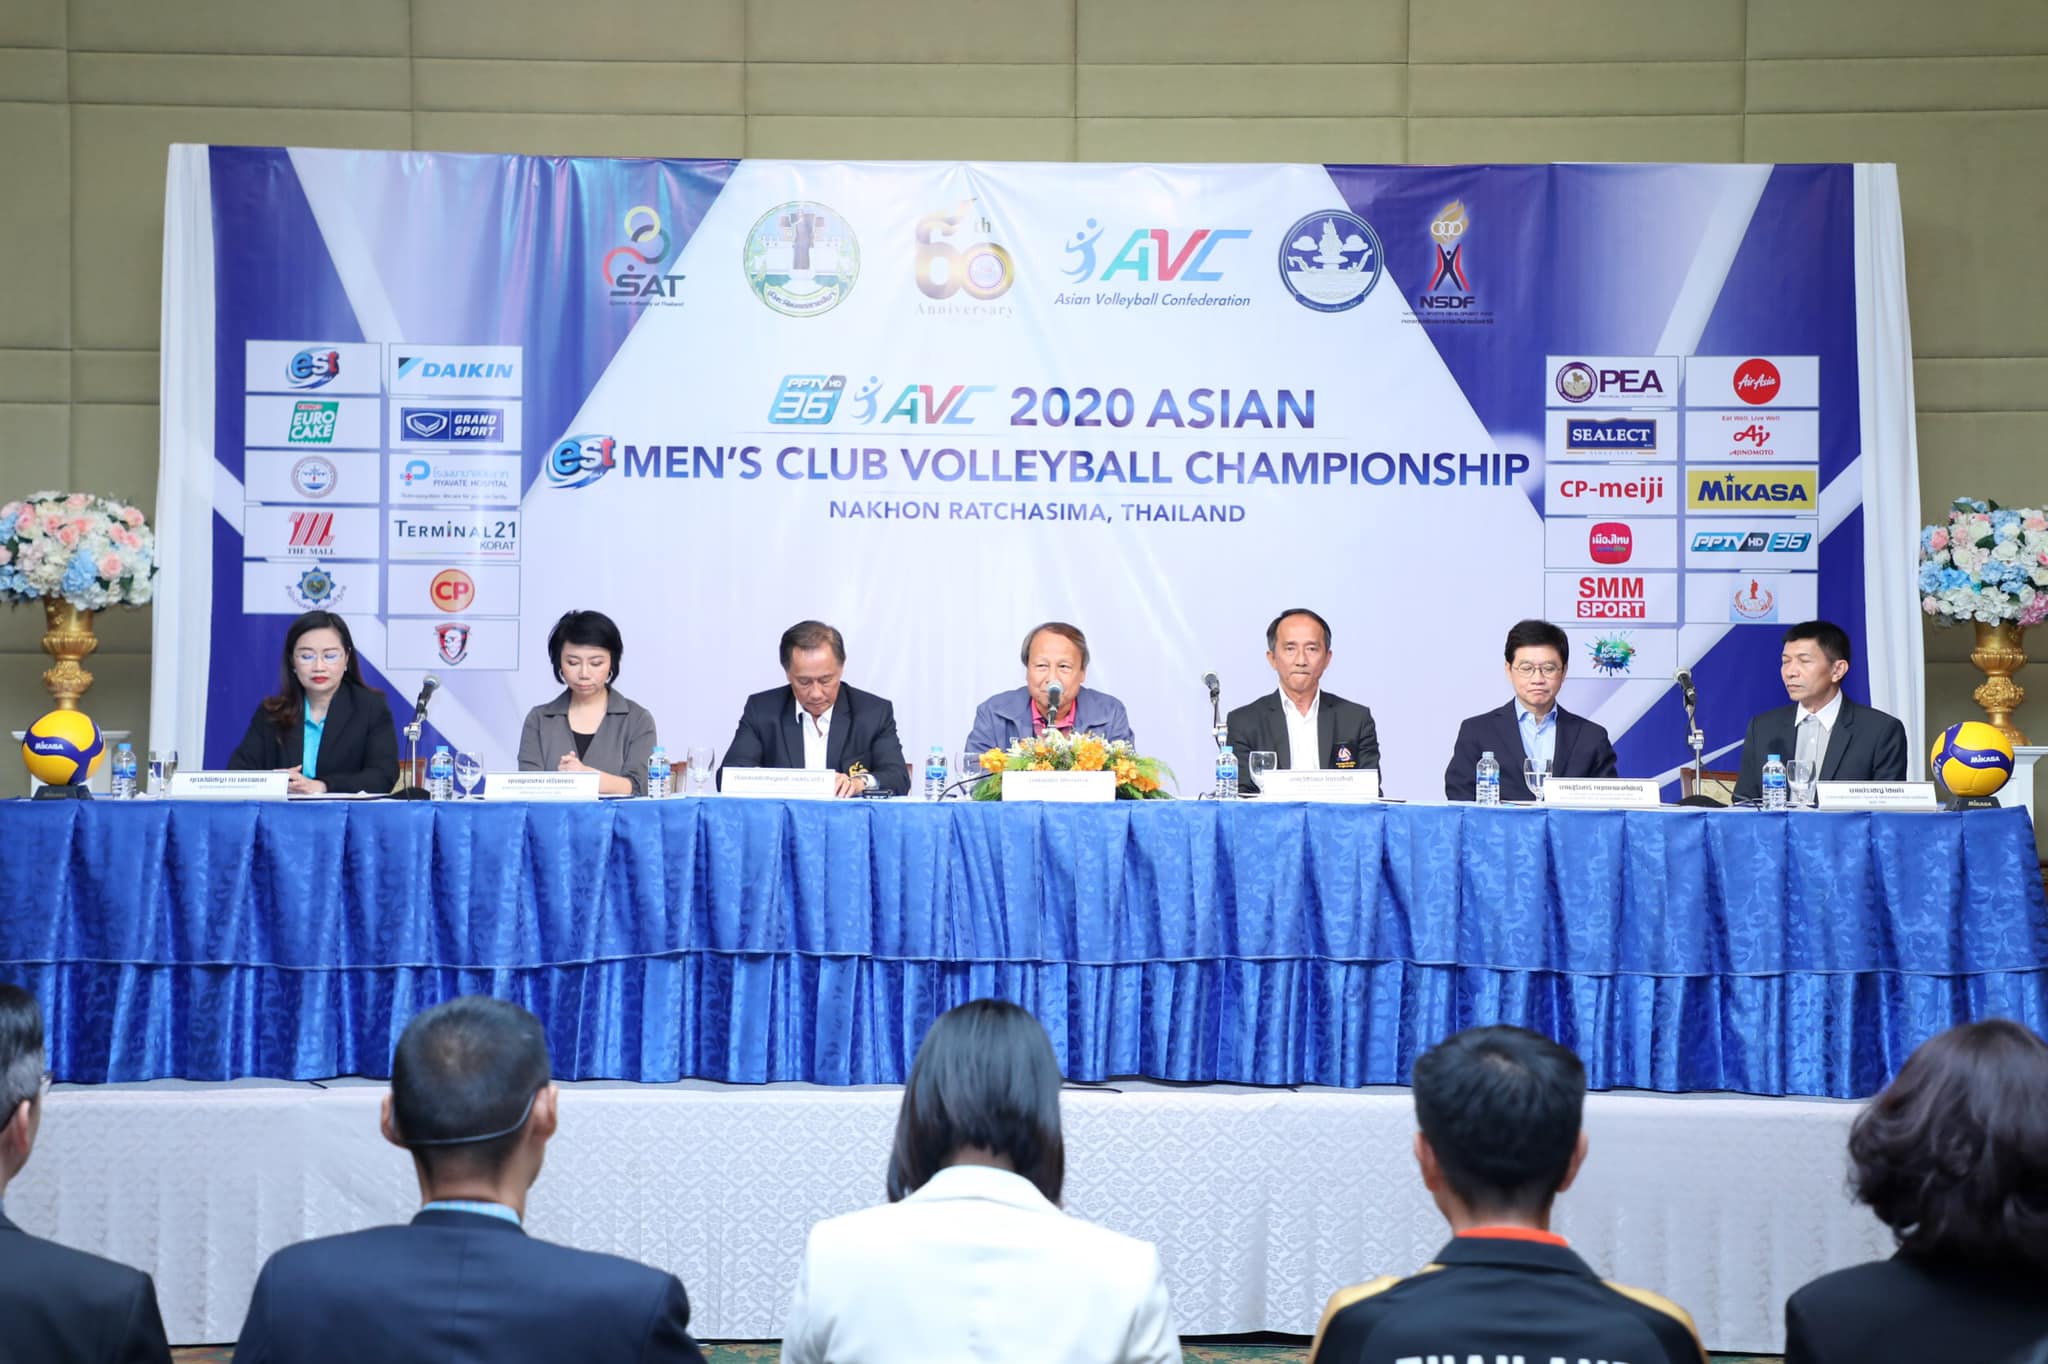 THAILAND WELL-PREPARED TO HOST ASIAN MEN'S CLUB CHAMPIONSHIP IN NAKHON RATCHASIMA FIRST IN 20 YEARS - Asian Volleyball Confederation